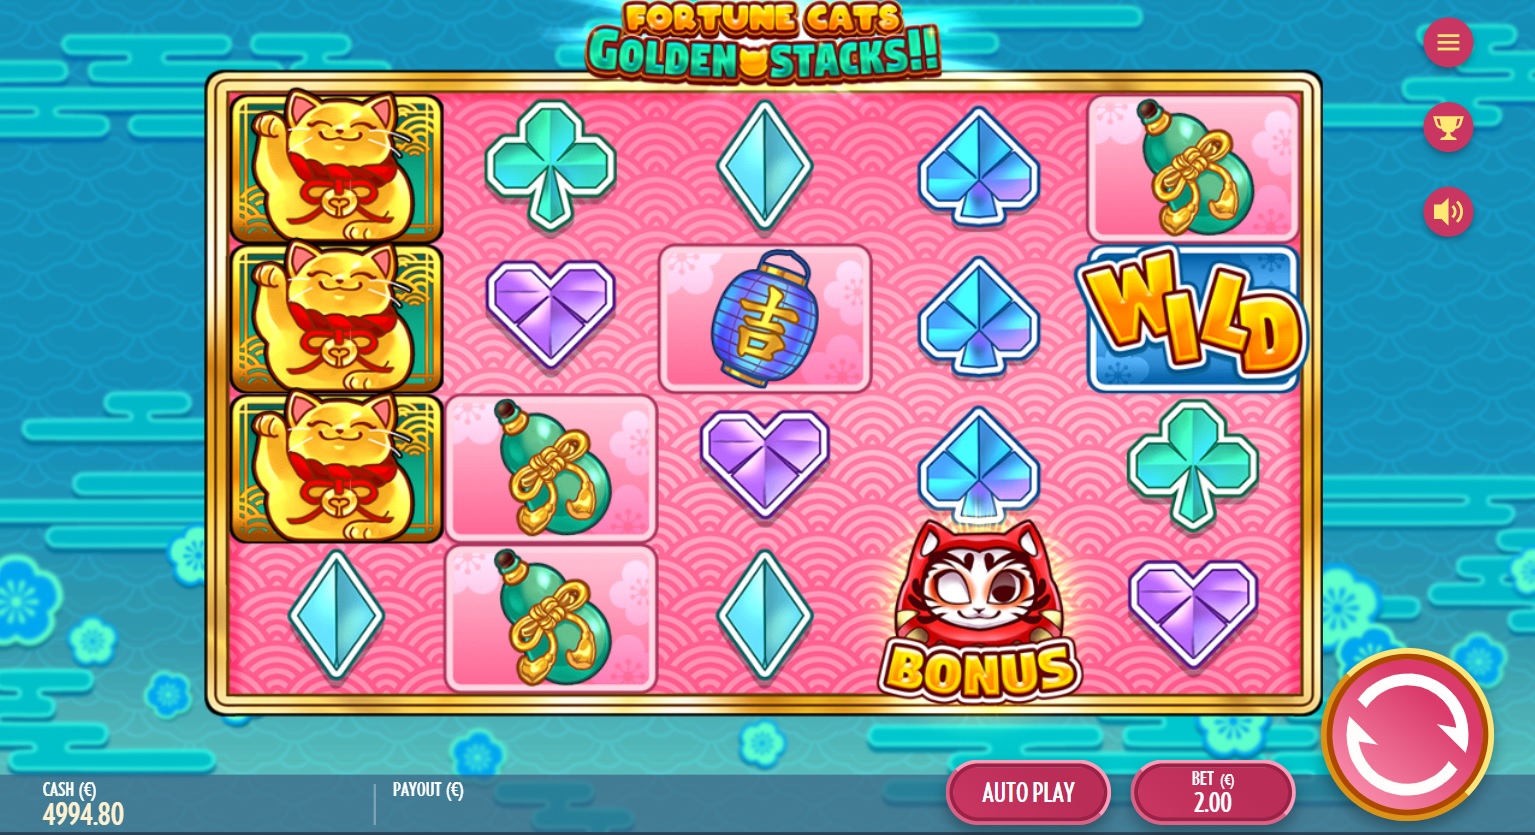 Fortune Cats Golden Stacks slot game